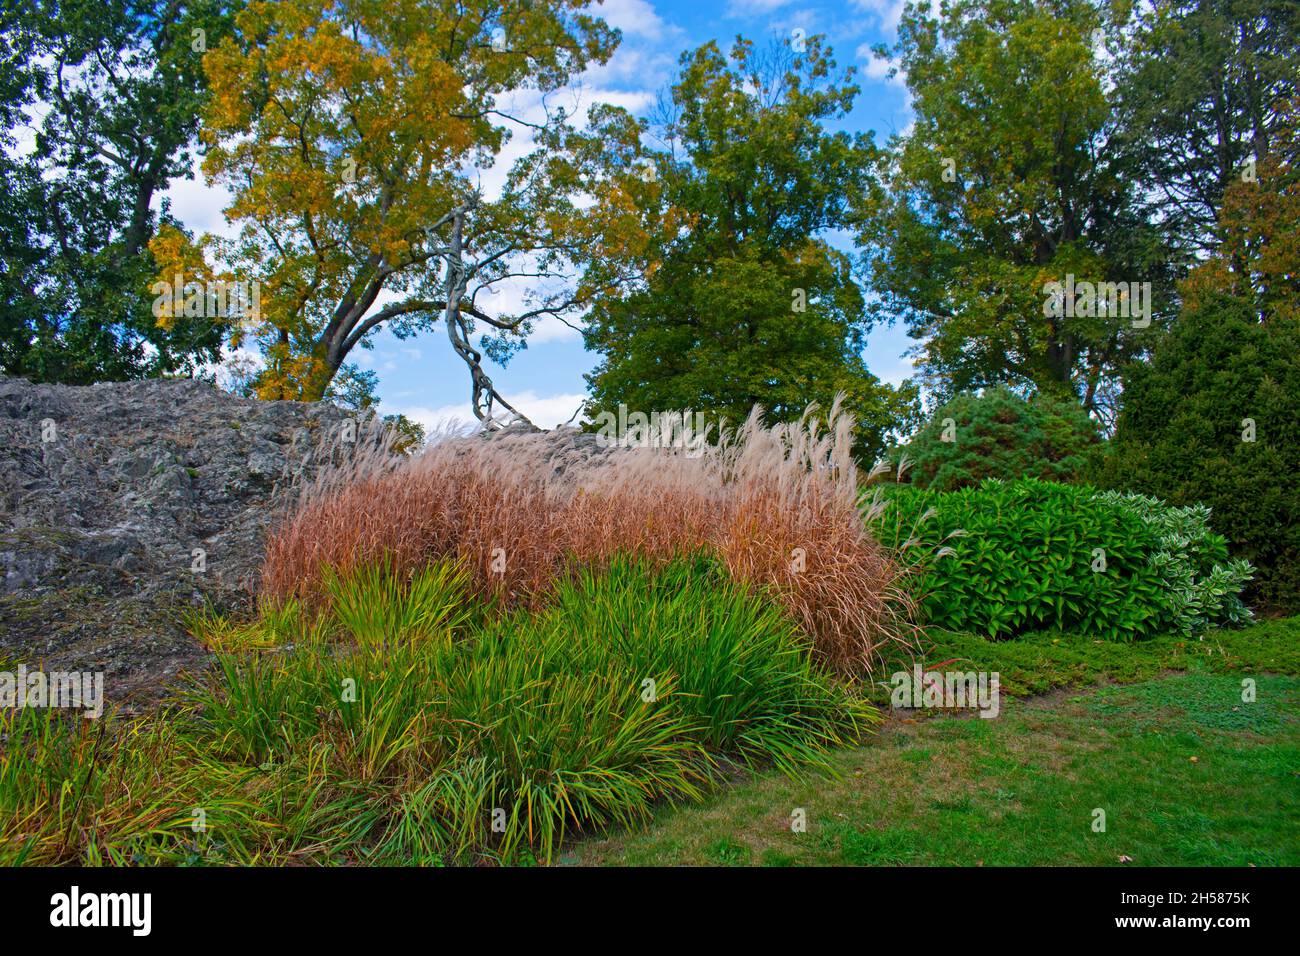 Miscanthus sinensis, or Chinese silver grass, a species of flowering plant in the grass family, in a garden setting on a sunny autumn day -01 Stock Photo